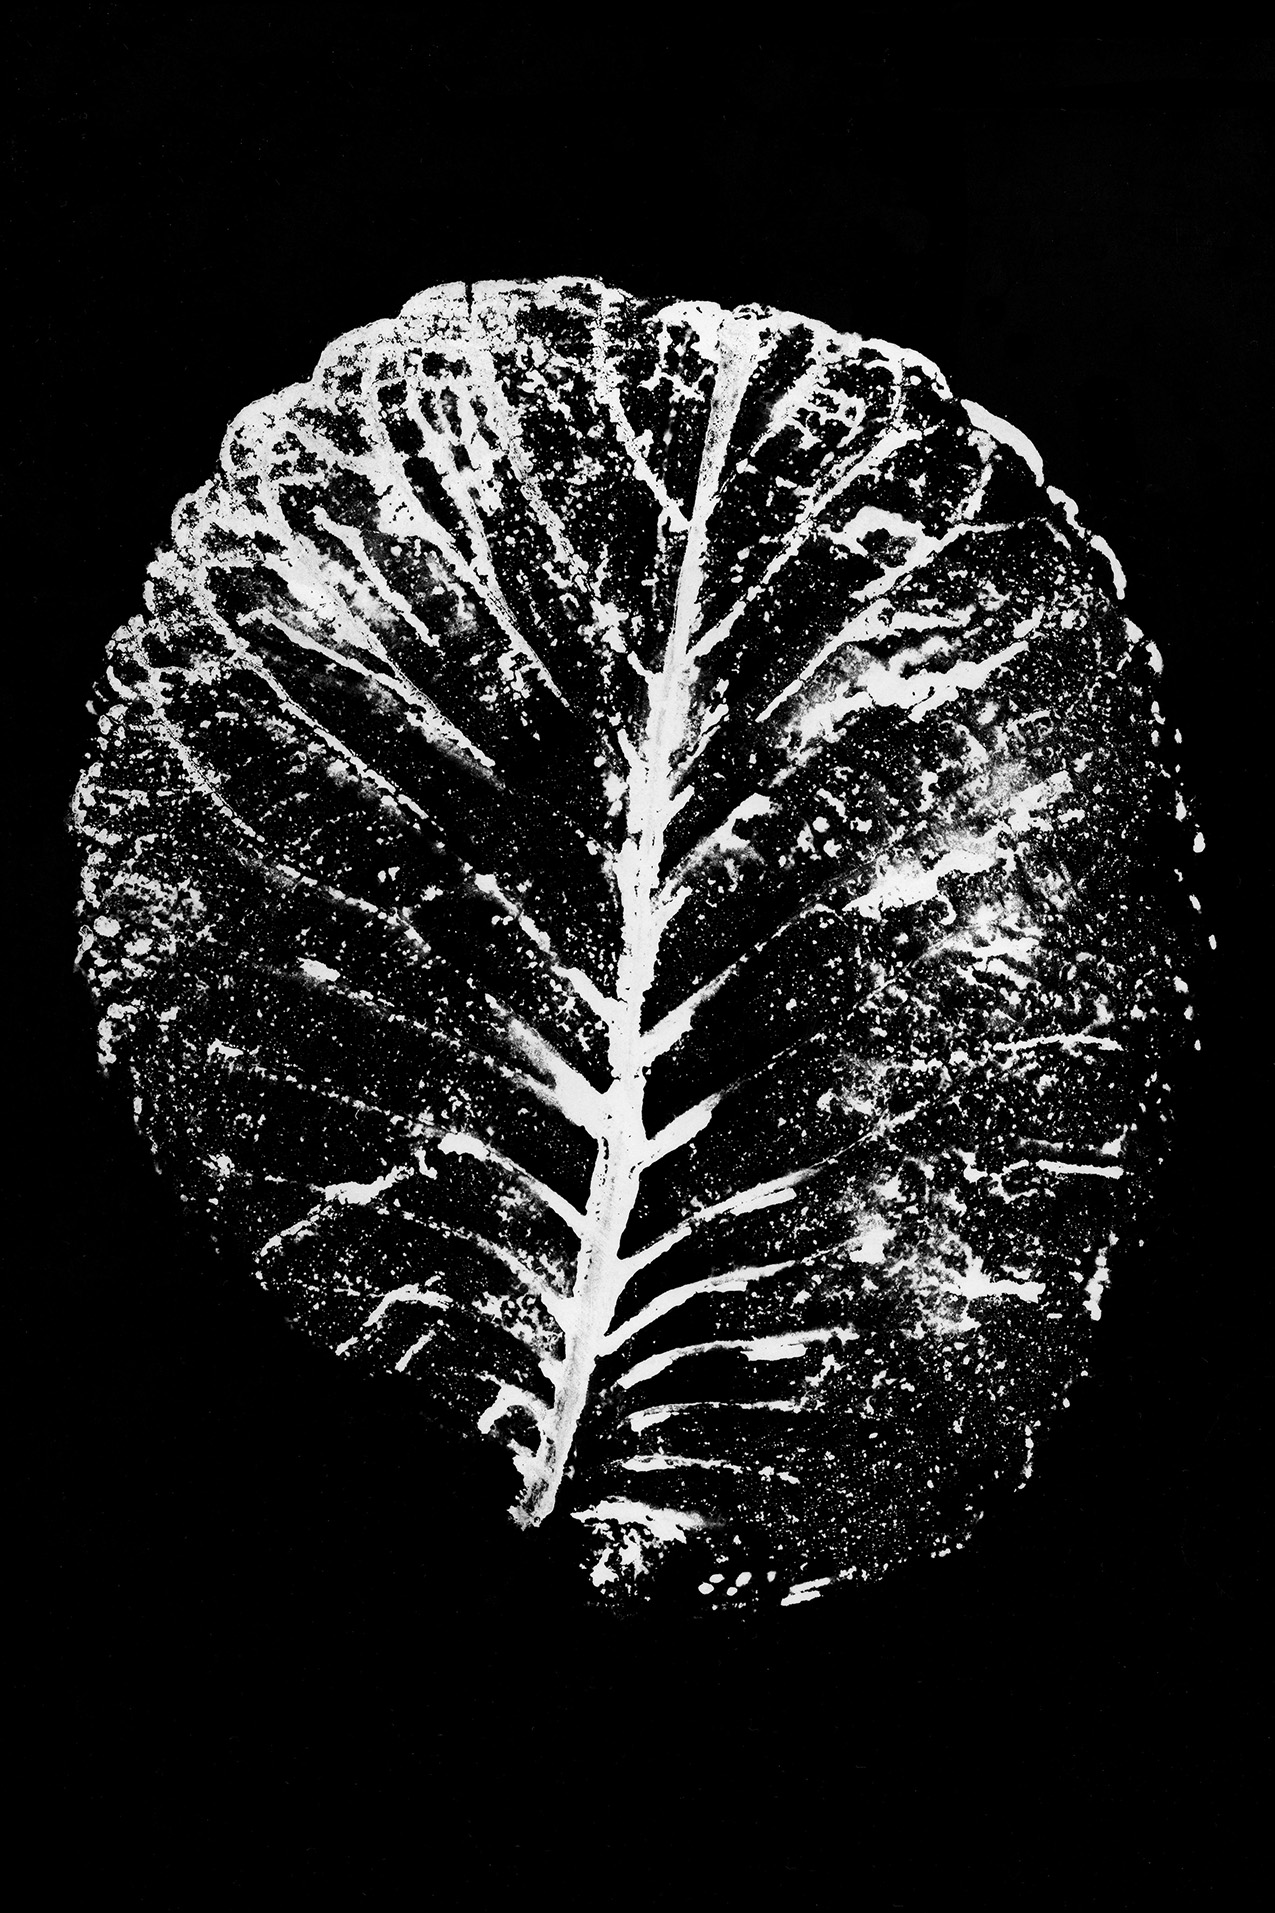 black and white photogram of a circular-shaped leaf with prominent veining